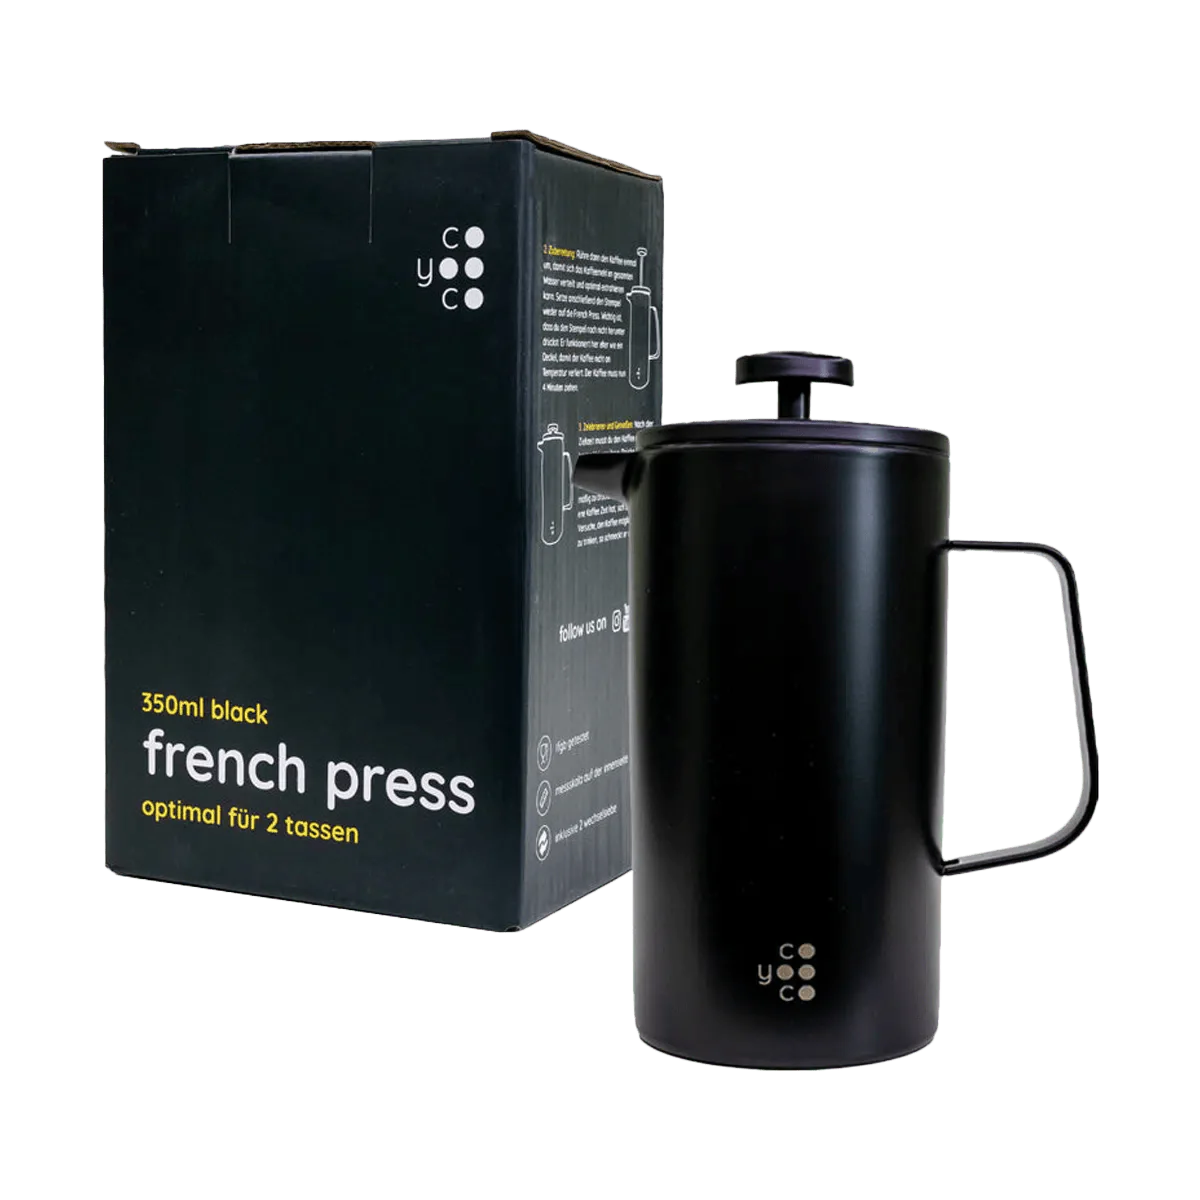 Coyooco French Press - 60beans